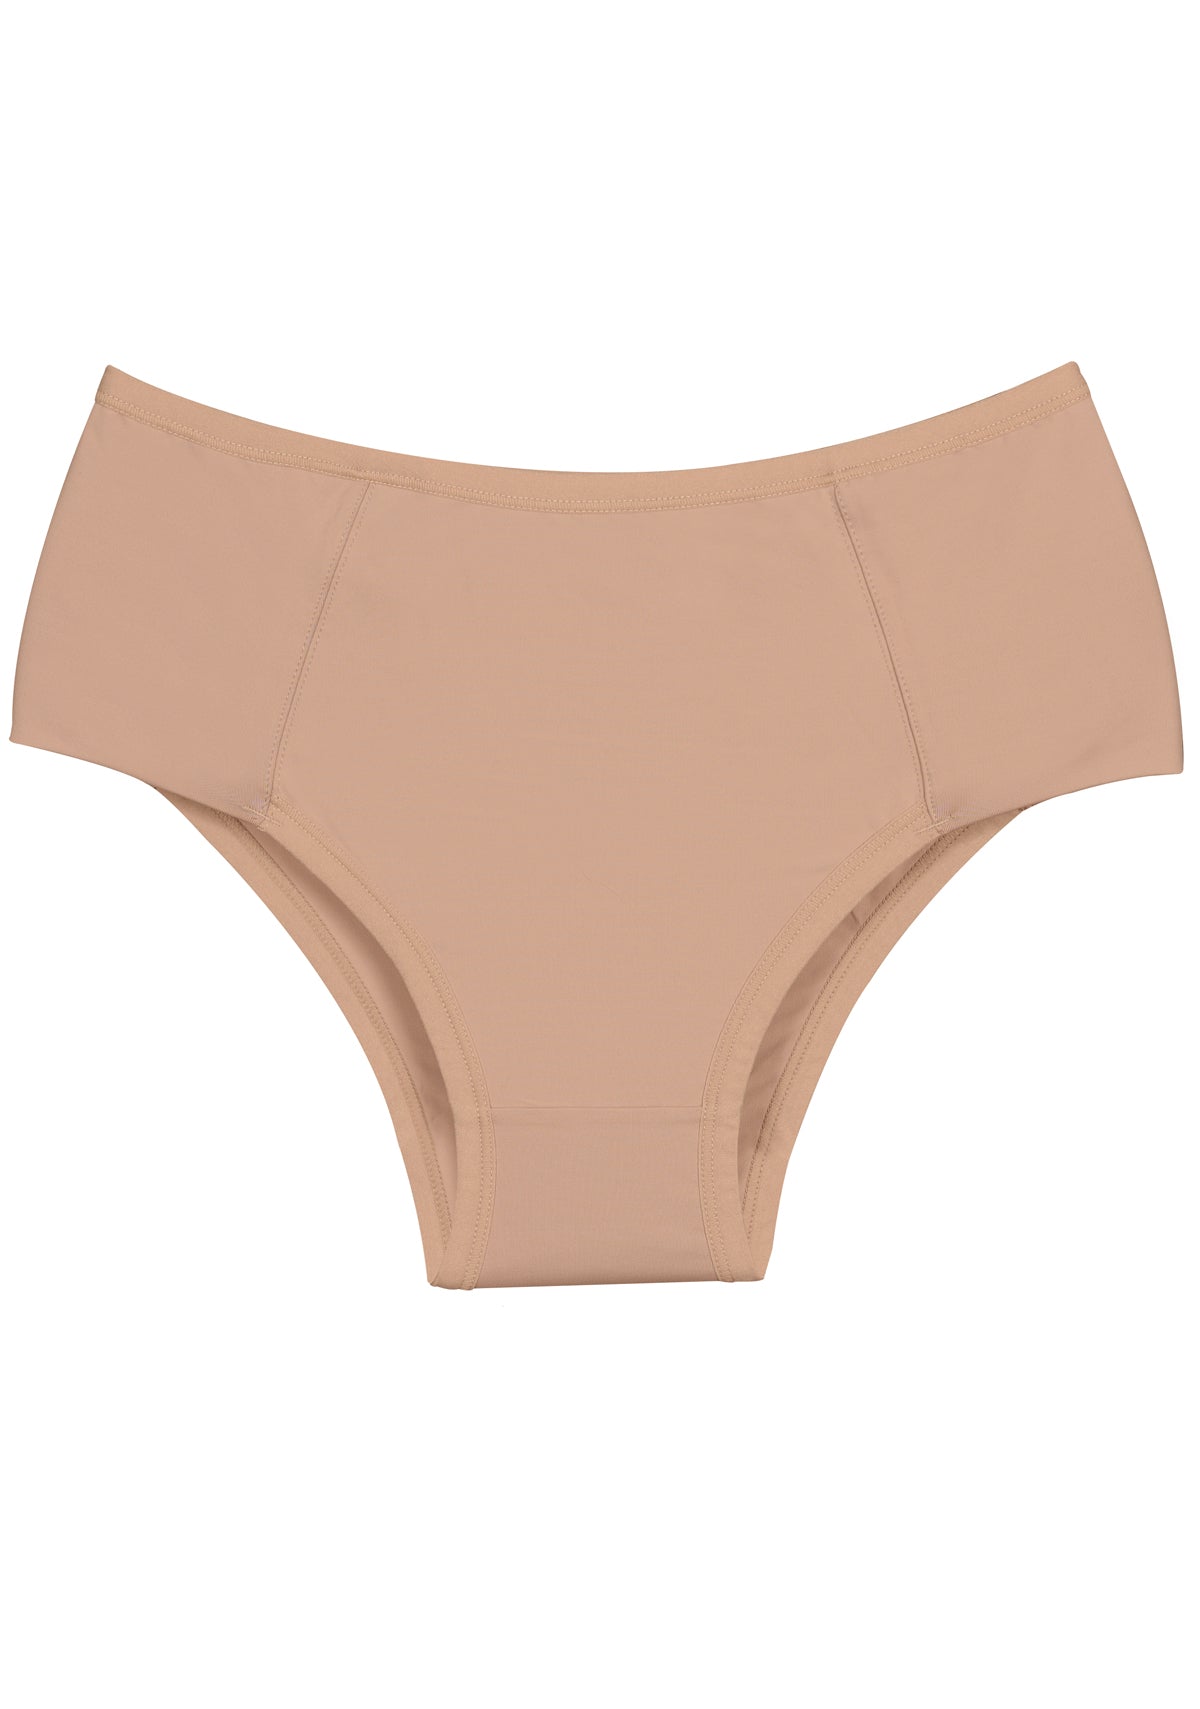 Reinforced Microfiber Panty Plus Size - 11922 – The BFF Company